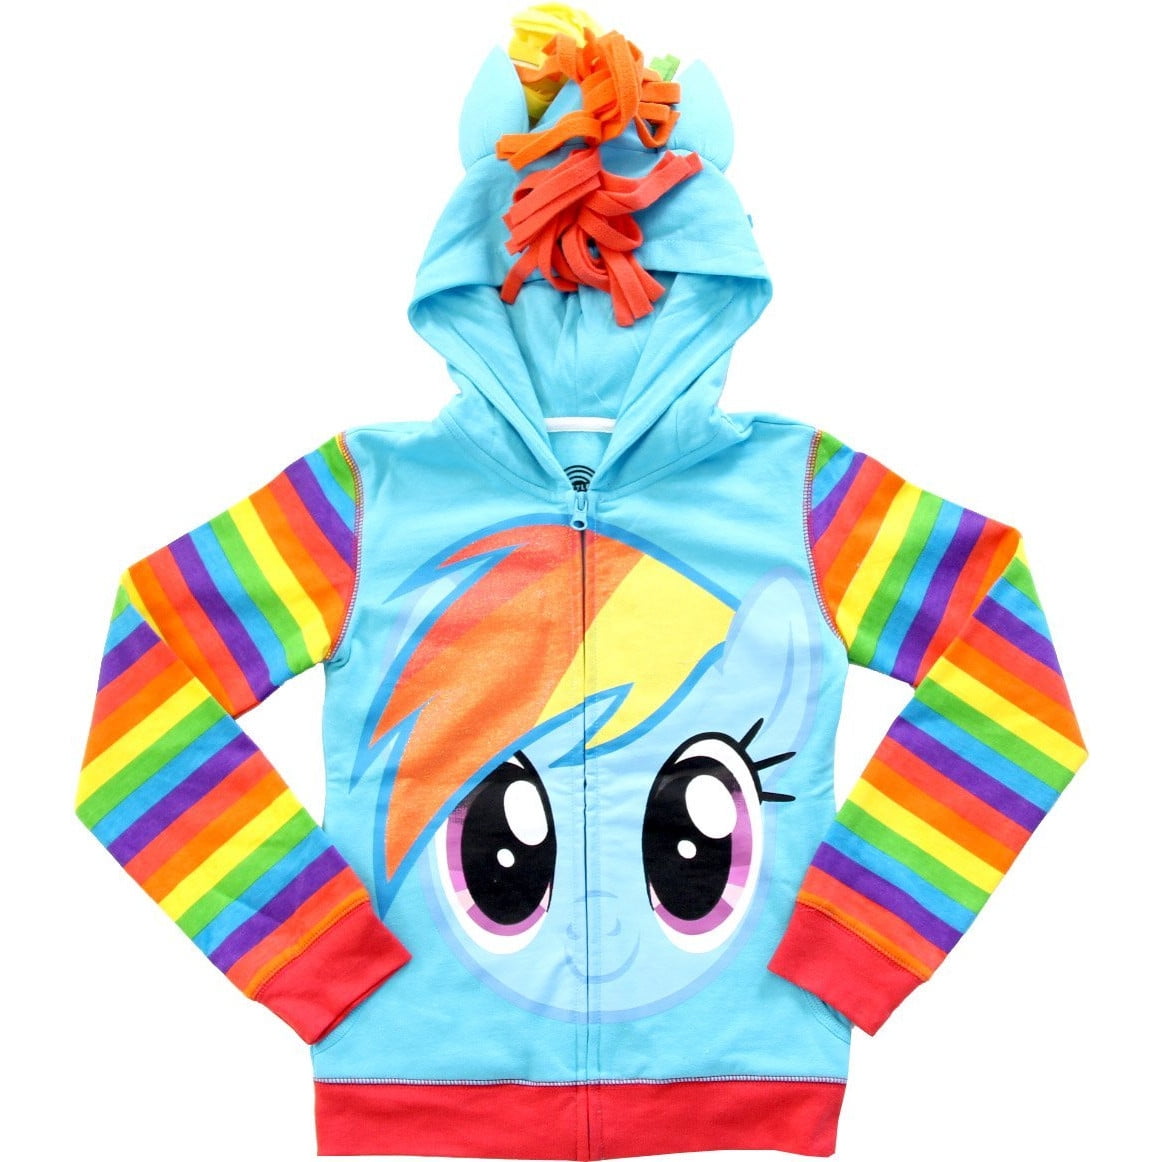 New with Tags!!! Girls Exstore My Little Pony Hoodie Top Sizes 2-5 years